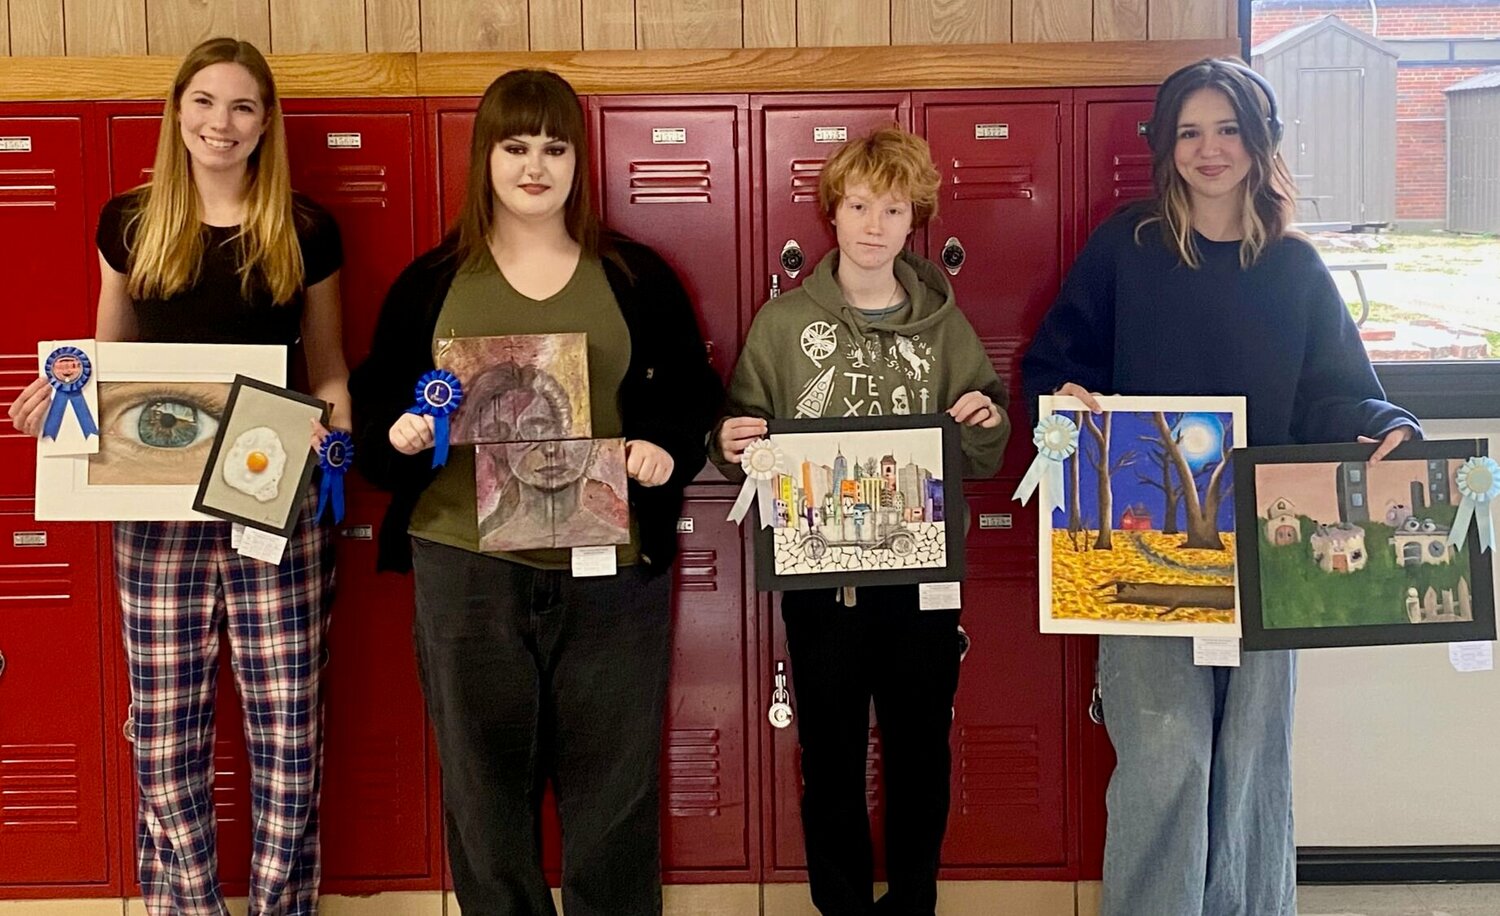 West Plains High School students entering works into the Dec. 2 High School Invitational art show hosted by the Willow Springs arts council, from left: Emily Ritter with her Best of Show colored pencil drawing of an eye and "Sunny Side Up," which took first place in the Colored Pencil category; Brooklynn Smith with her piece, "Frankie Friends," which took first place in Painting; Abigail Price with "Vintage in the City," which took third in Mixed Media; and Alyssa Heller, with two honorable mentions, a painting called "Growing Old," and a mixed-media landscape.